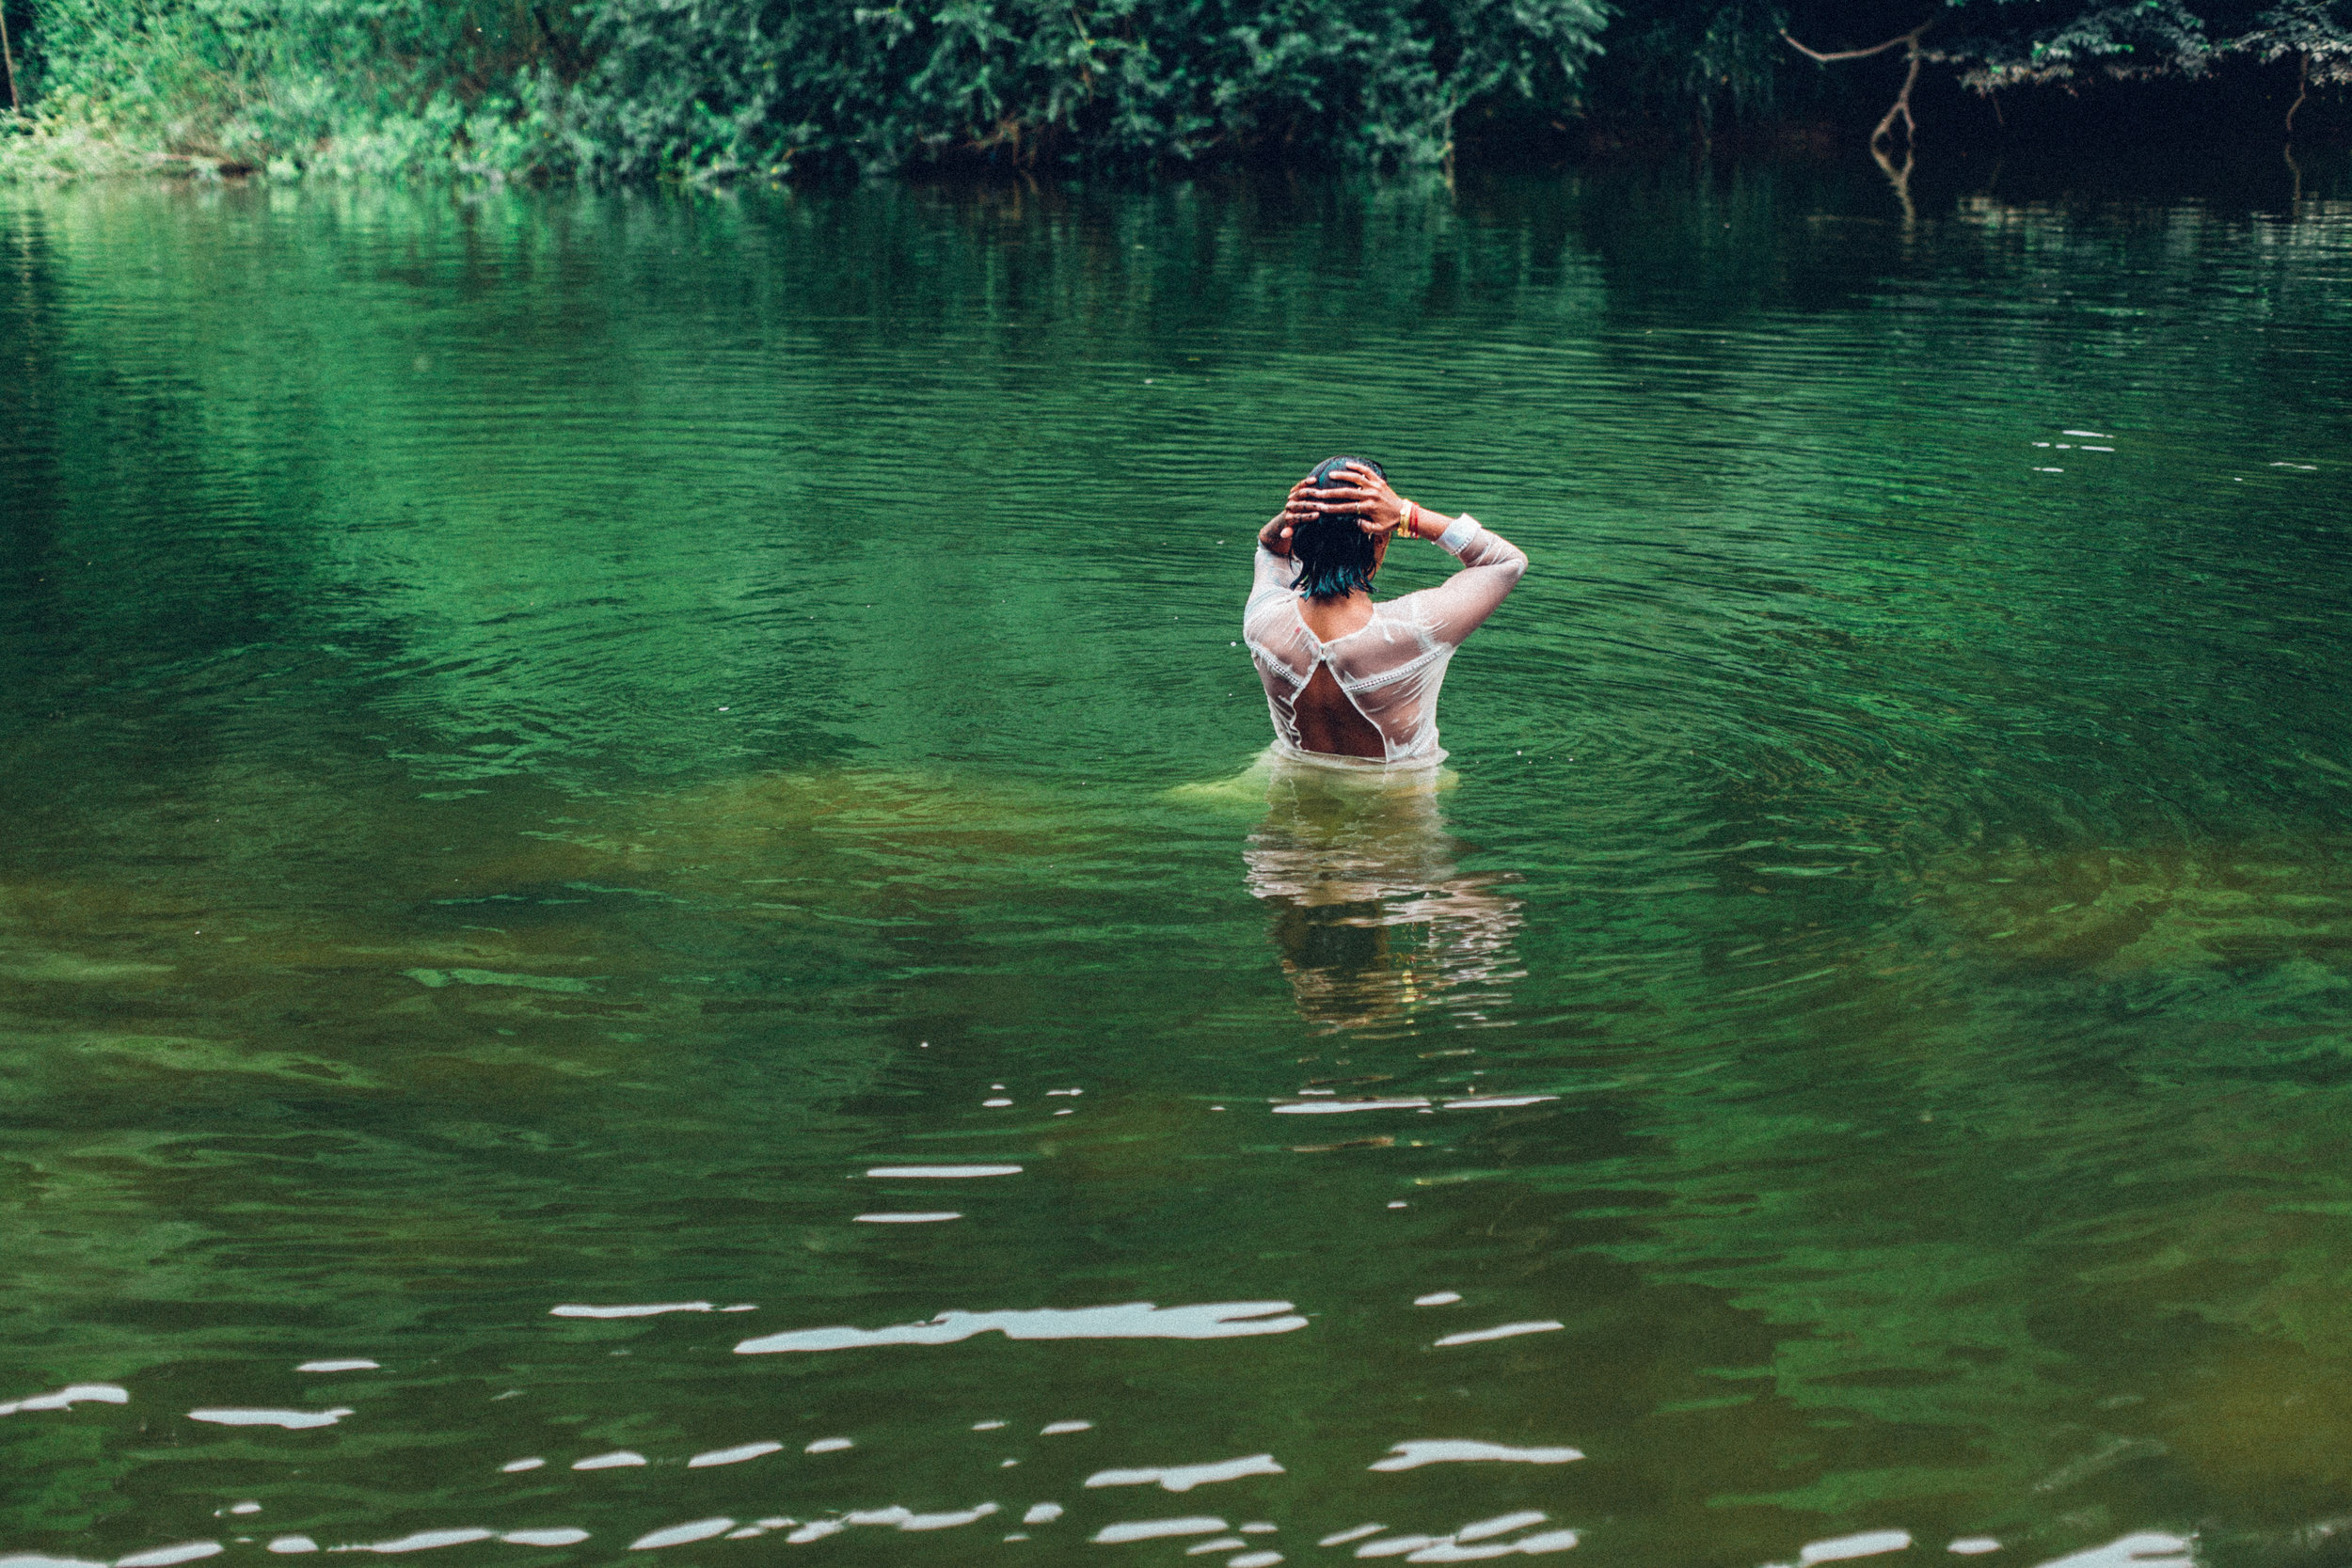  Image description: A woman is half submerged in a river 